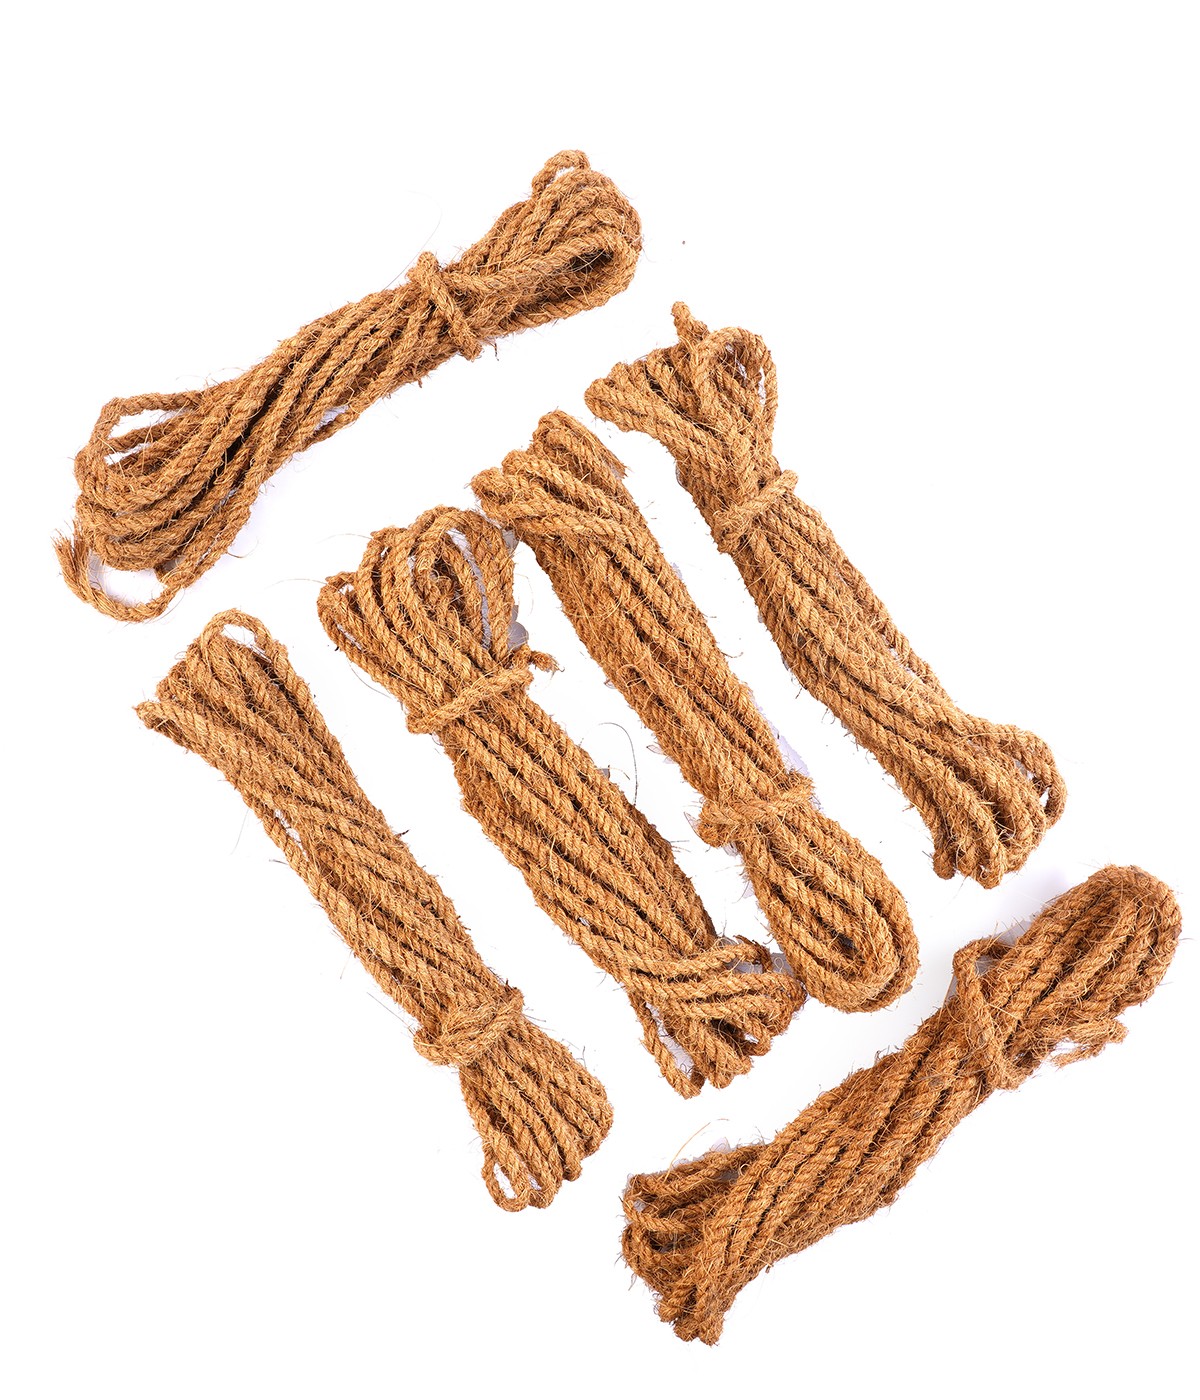 Premium Quality Coir Rope - Natural, Durable Twine for Crafts